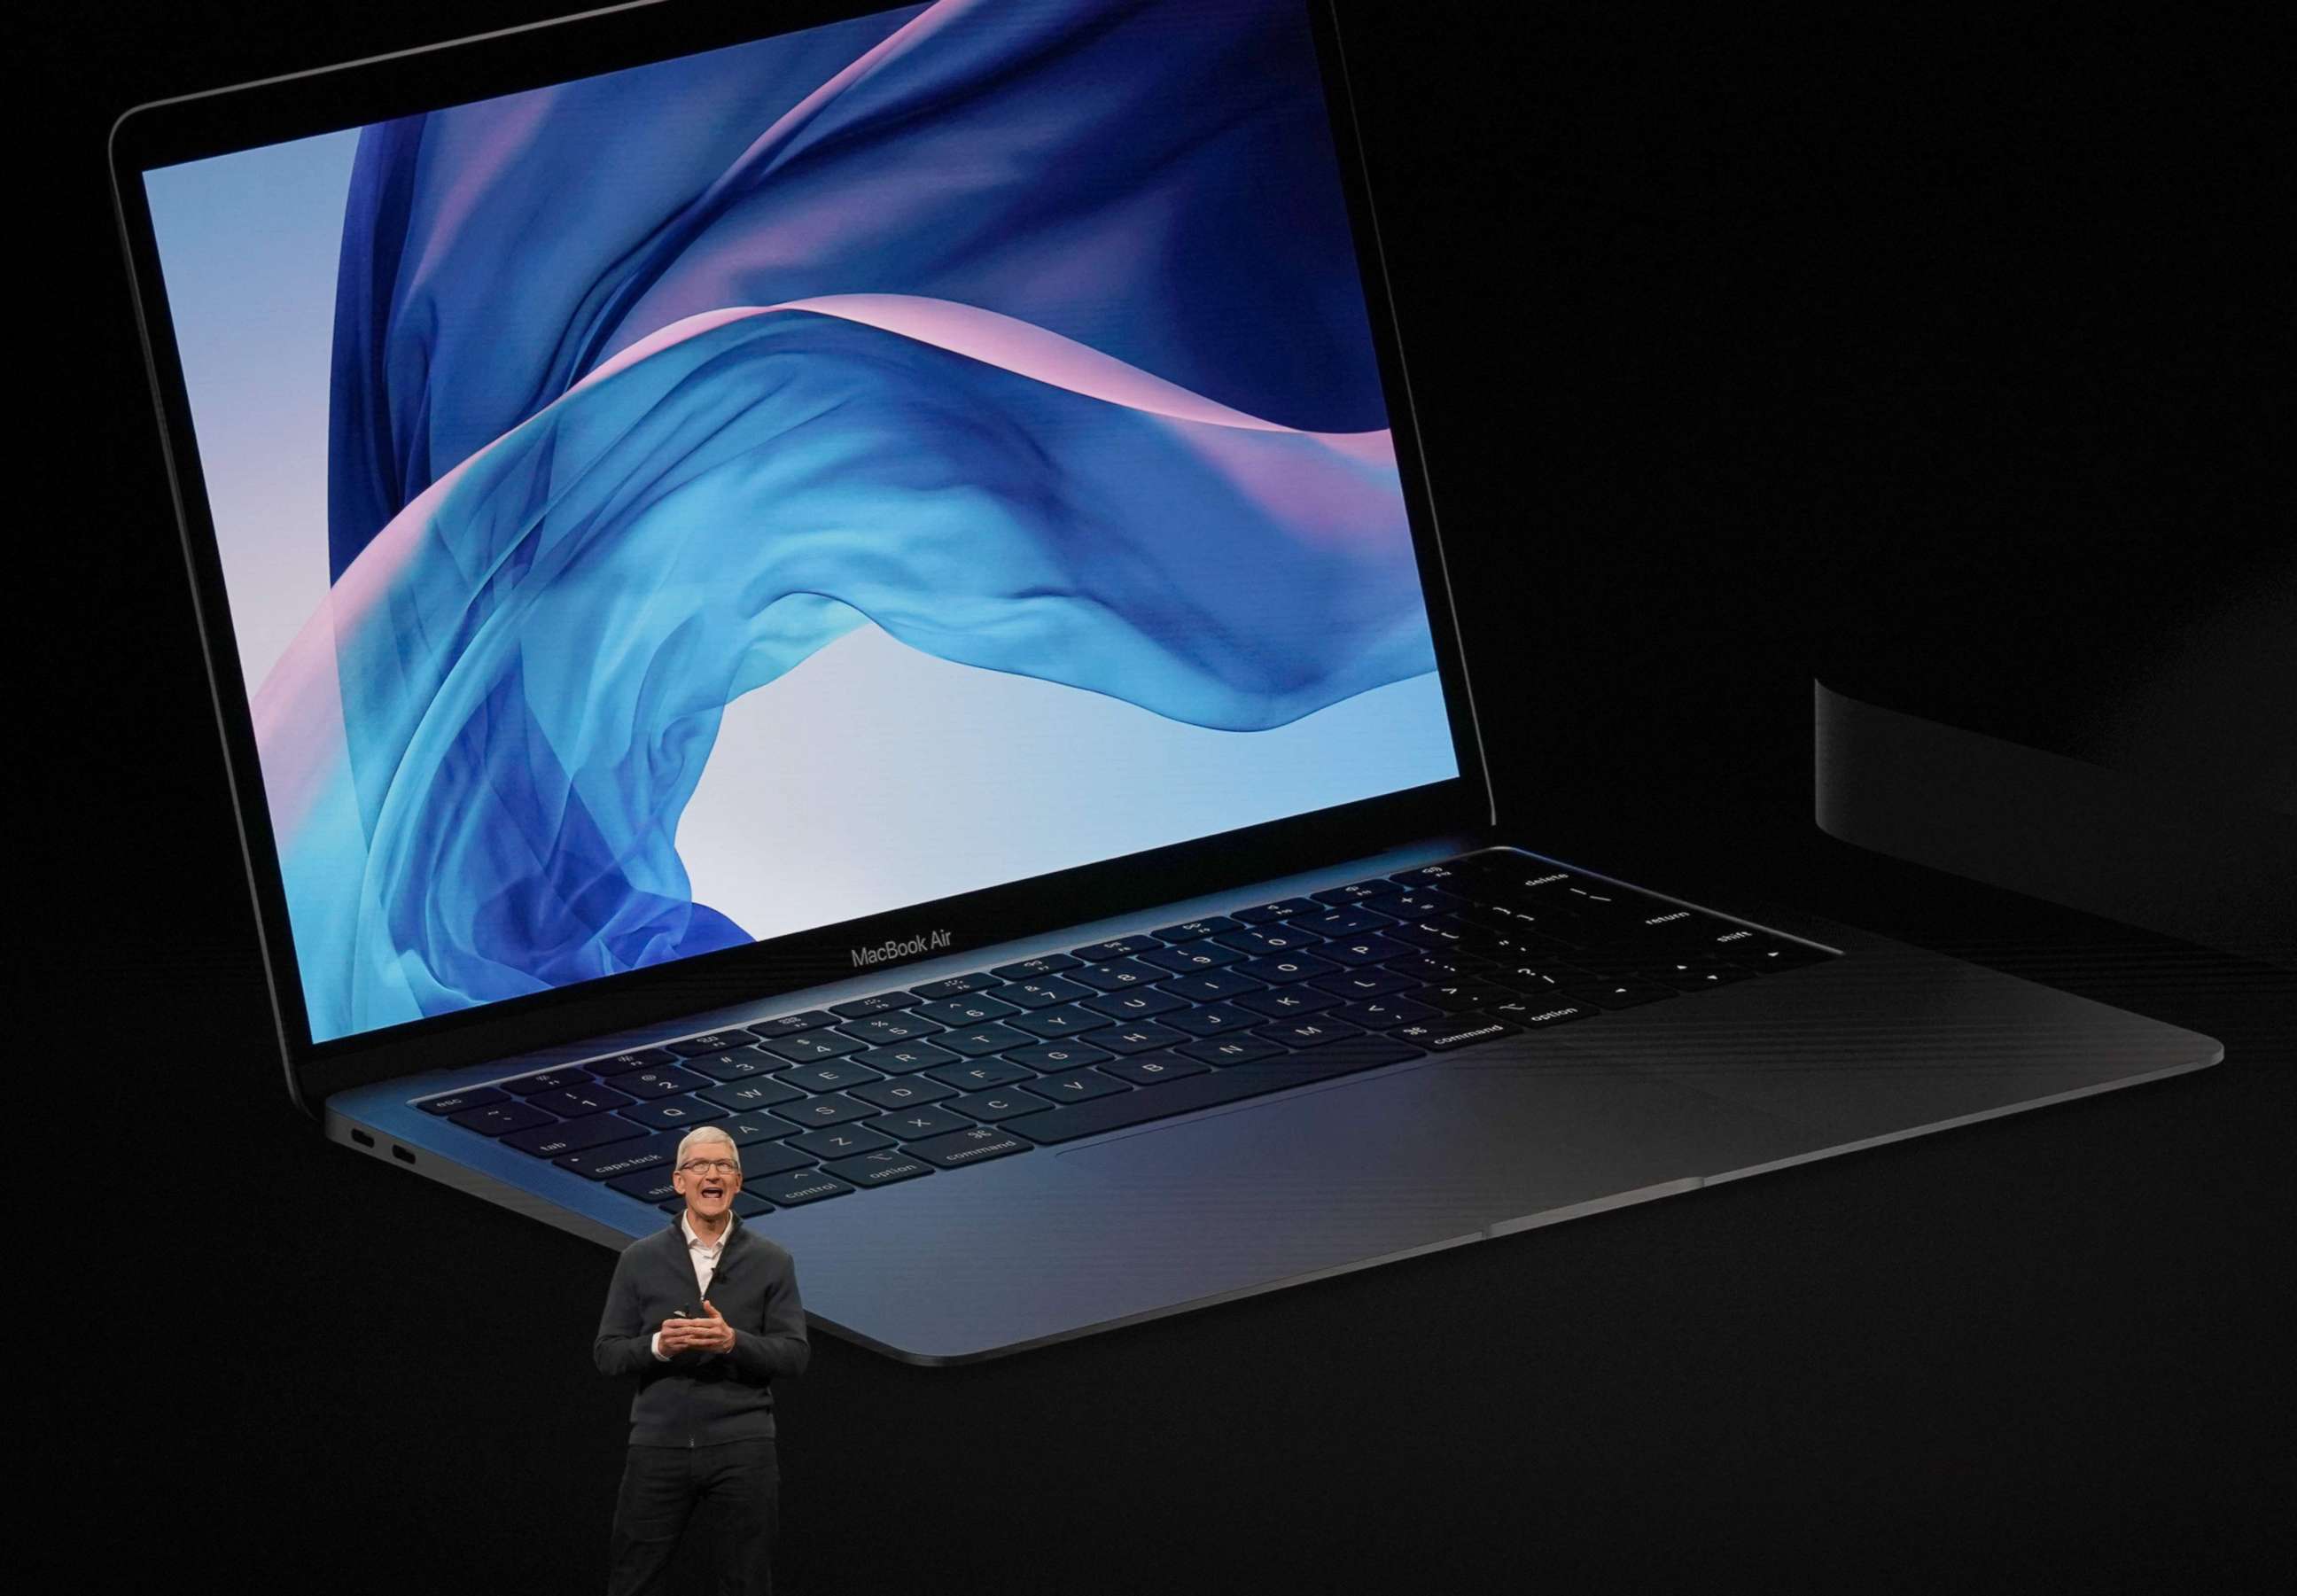 PHOTO: Apple CEO Tim Cook presents new products, including new Macbook laptops, during a special event at the Brooklyn Academy of Music, Oct. 30, 2018, in New York.